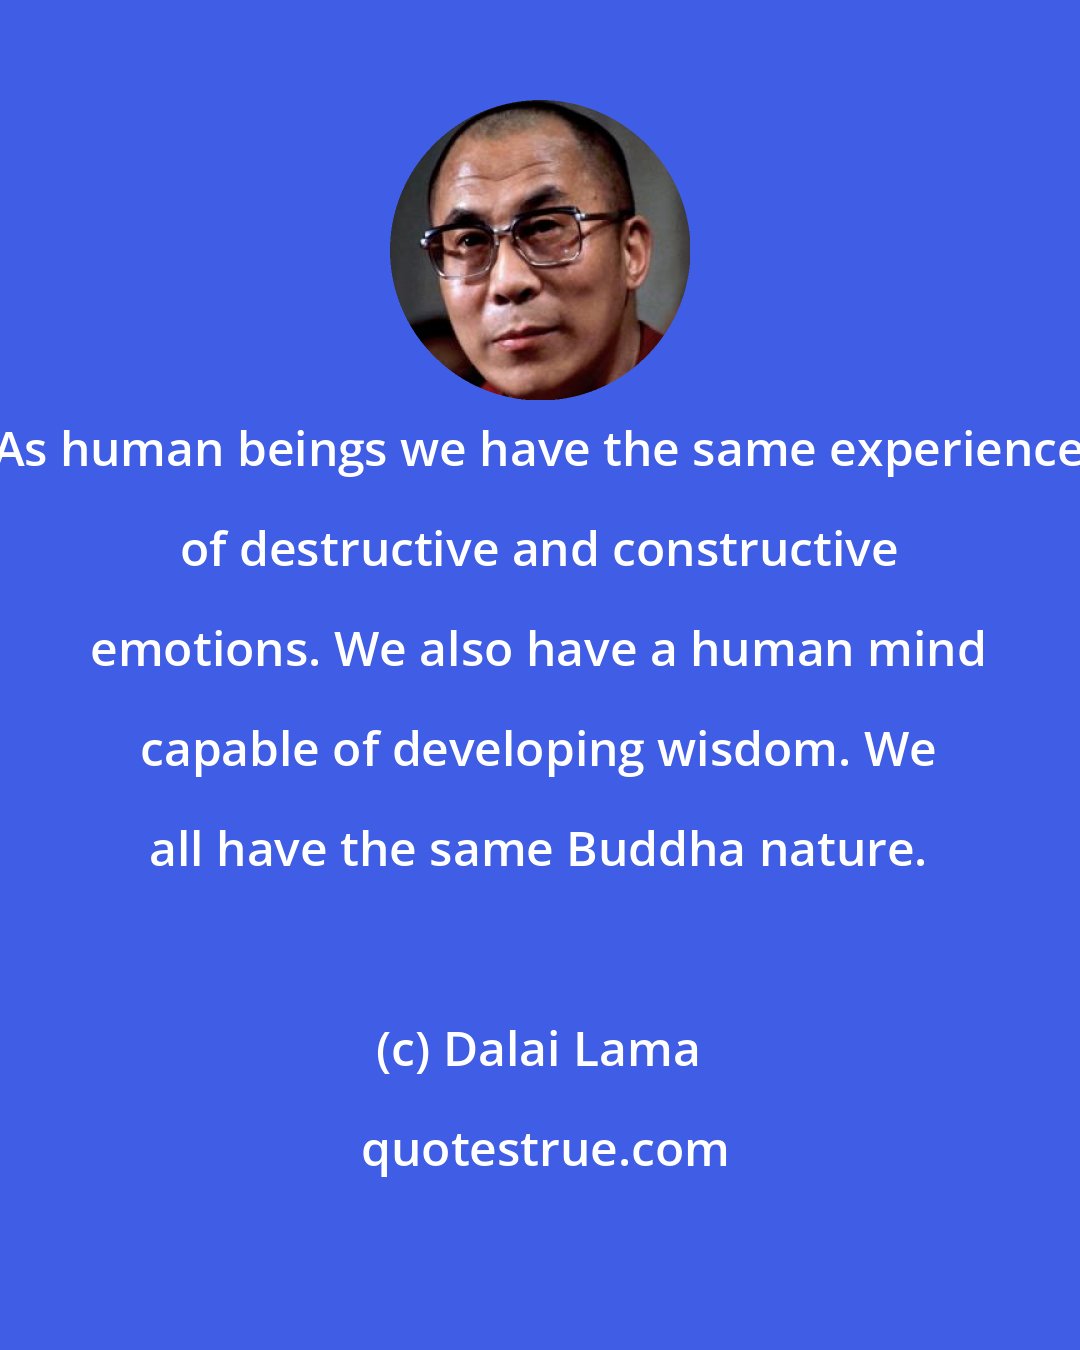 Dalai Lama: As human beings we have the same experience of destructive and constructive emotions. We also have a human mind capable of developing wisdom. We all have the same Buddha nature.